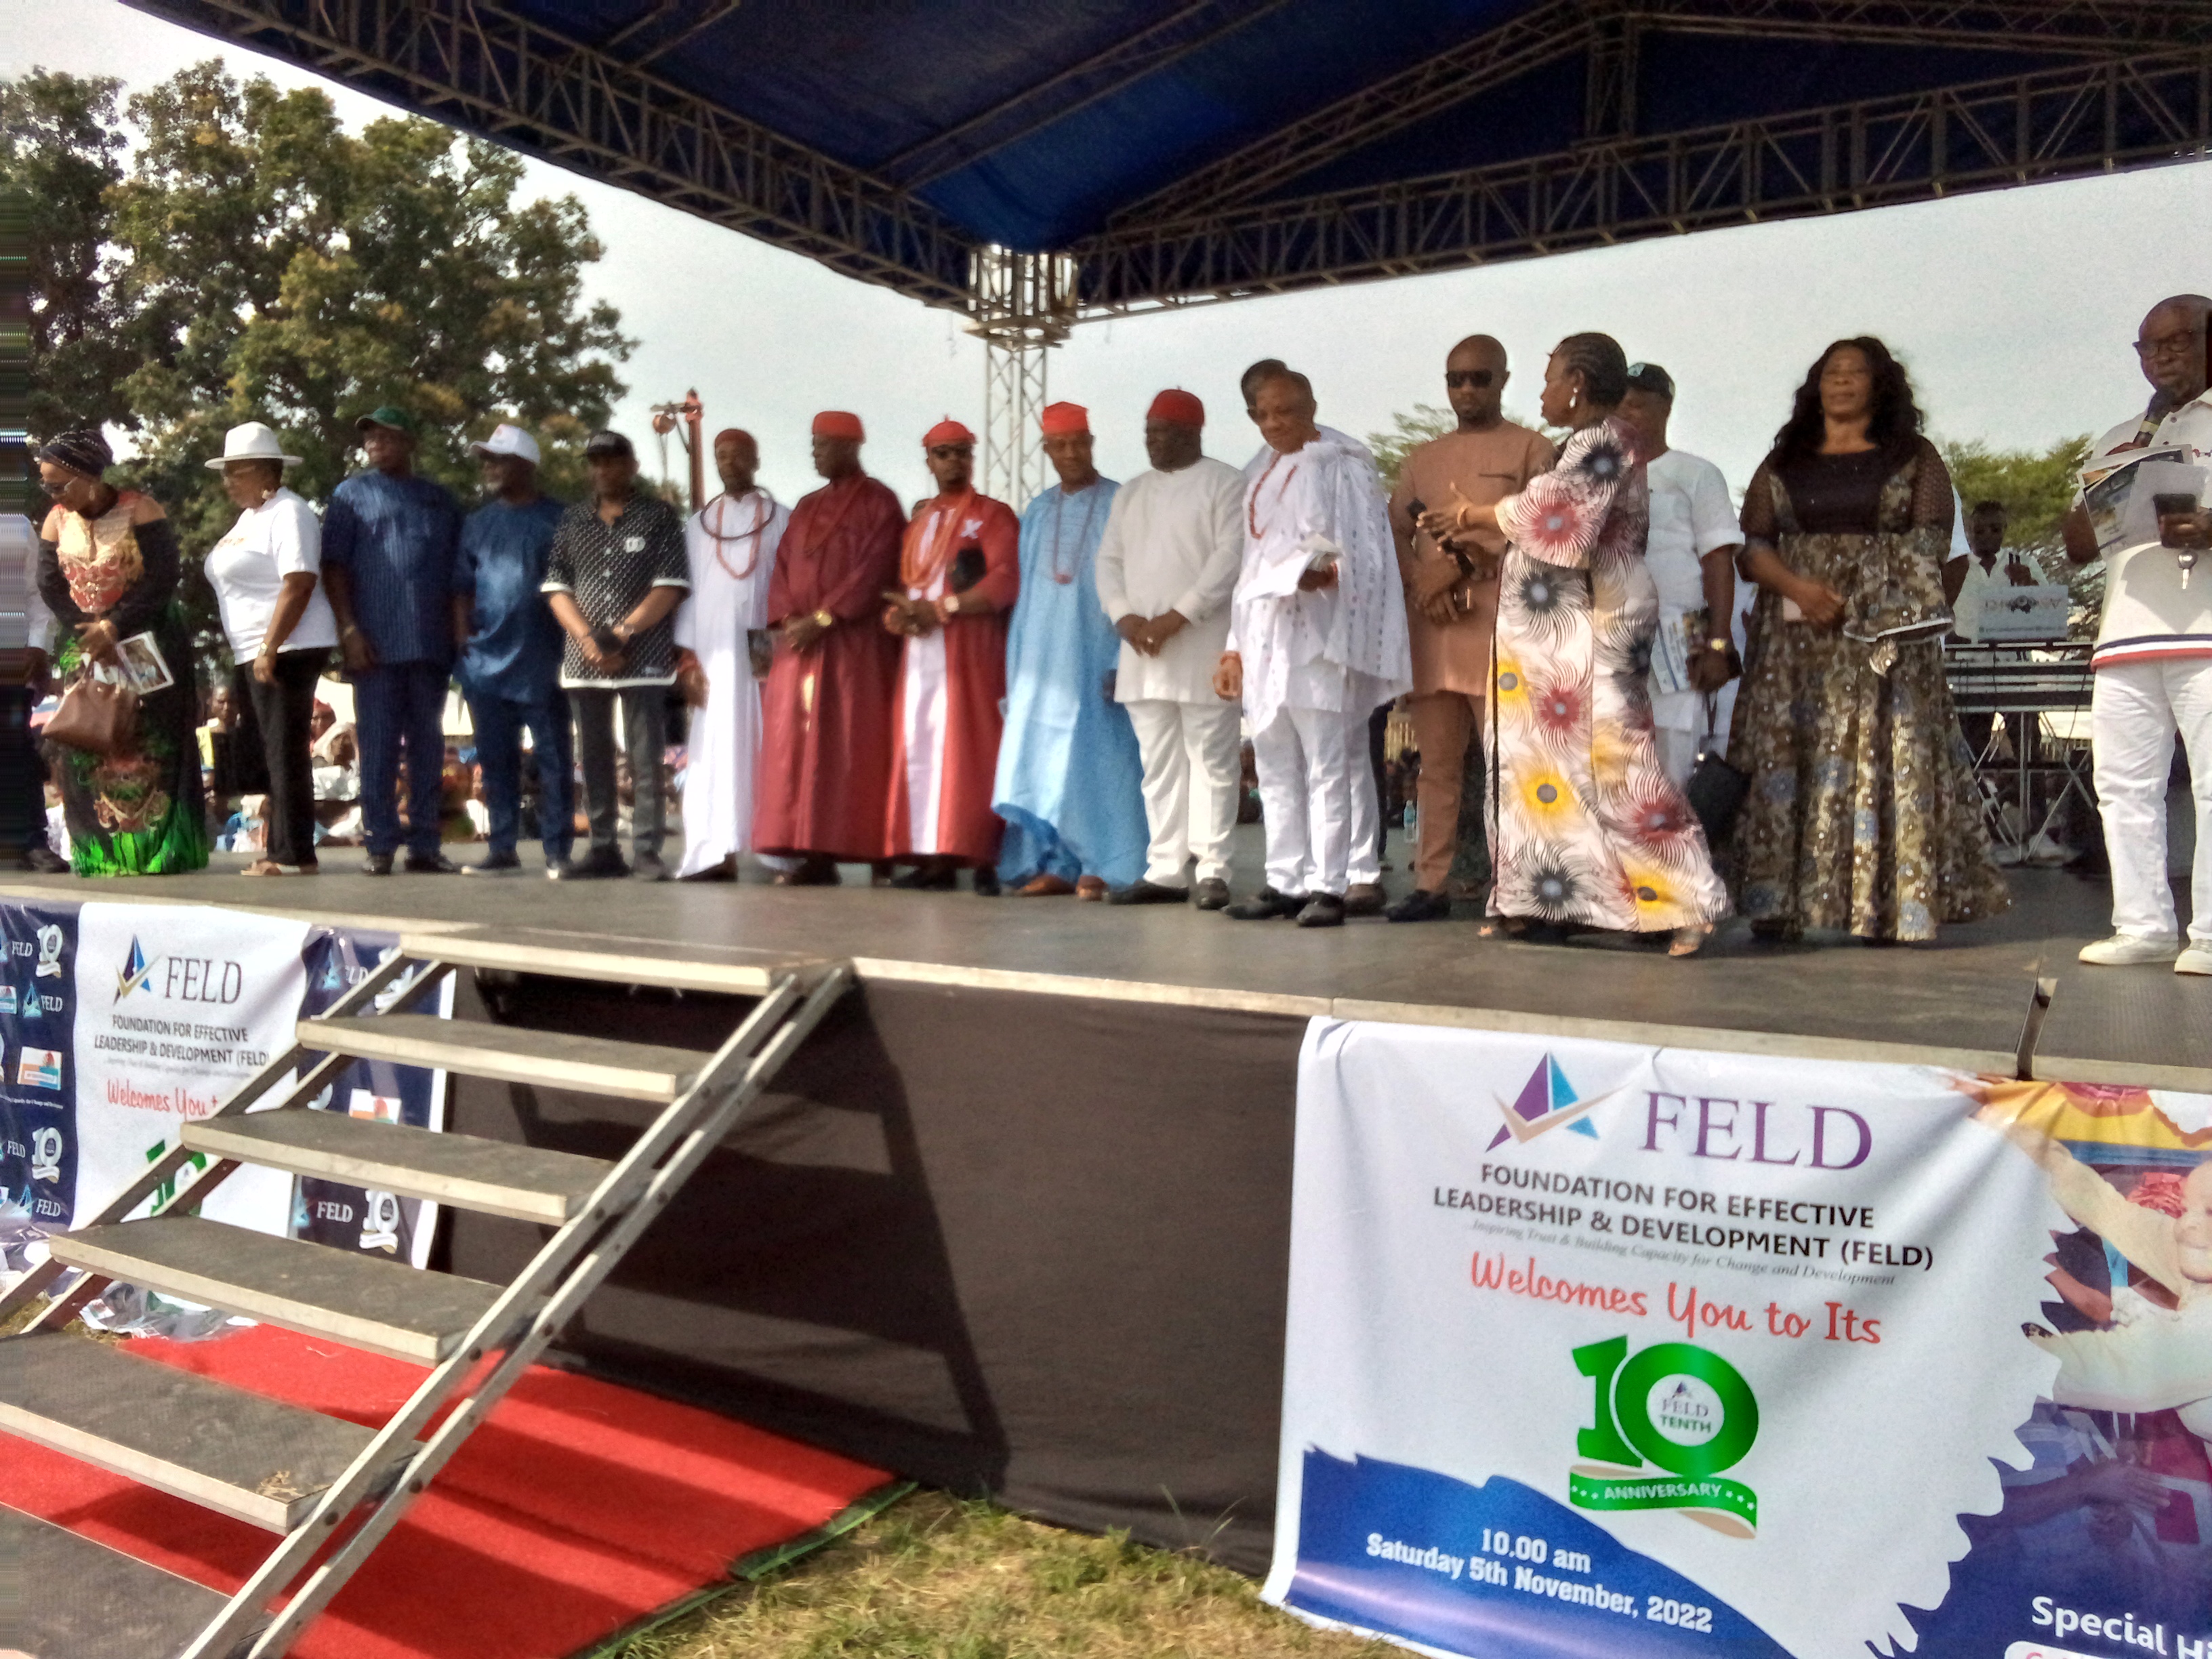 FELD names Okowa its Patron; Elumelu to inject N100m to support Foundation’s objectives, economic empowerment programmes